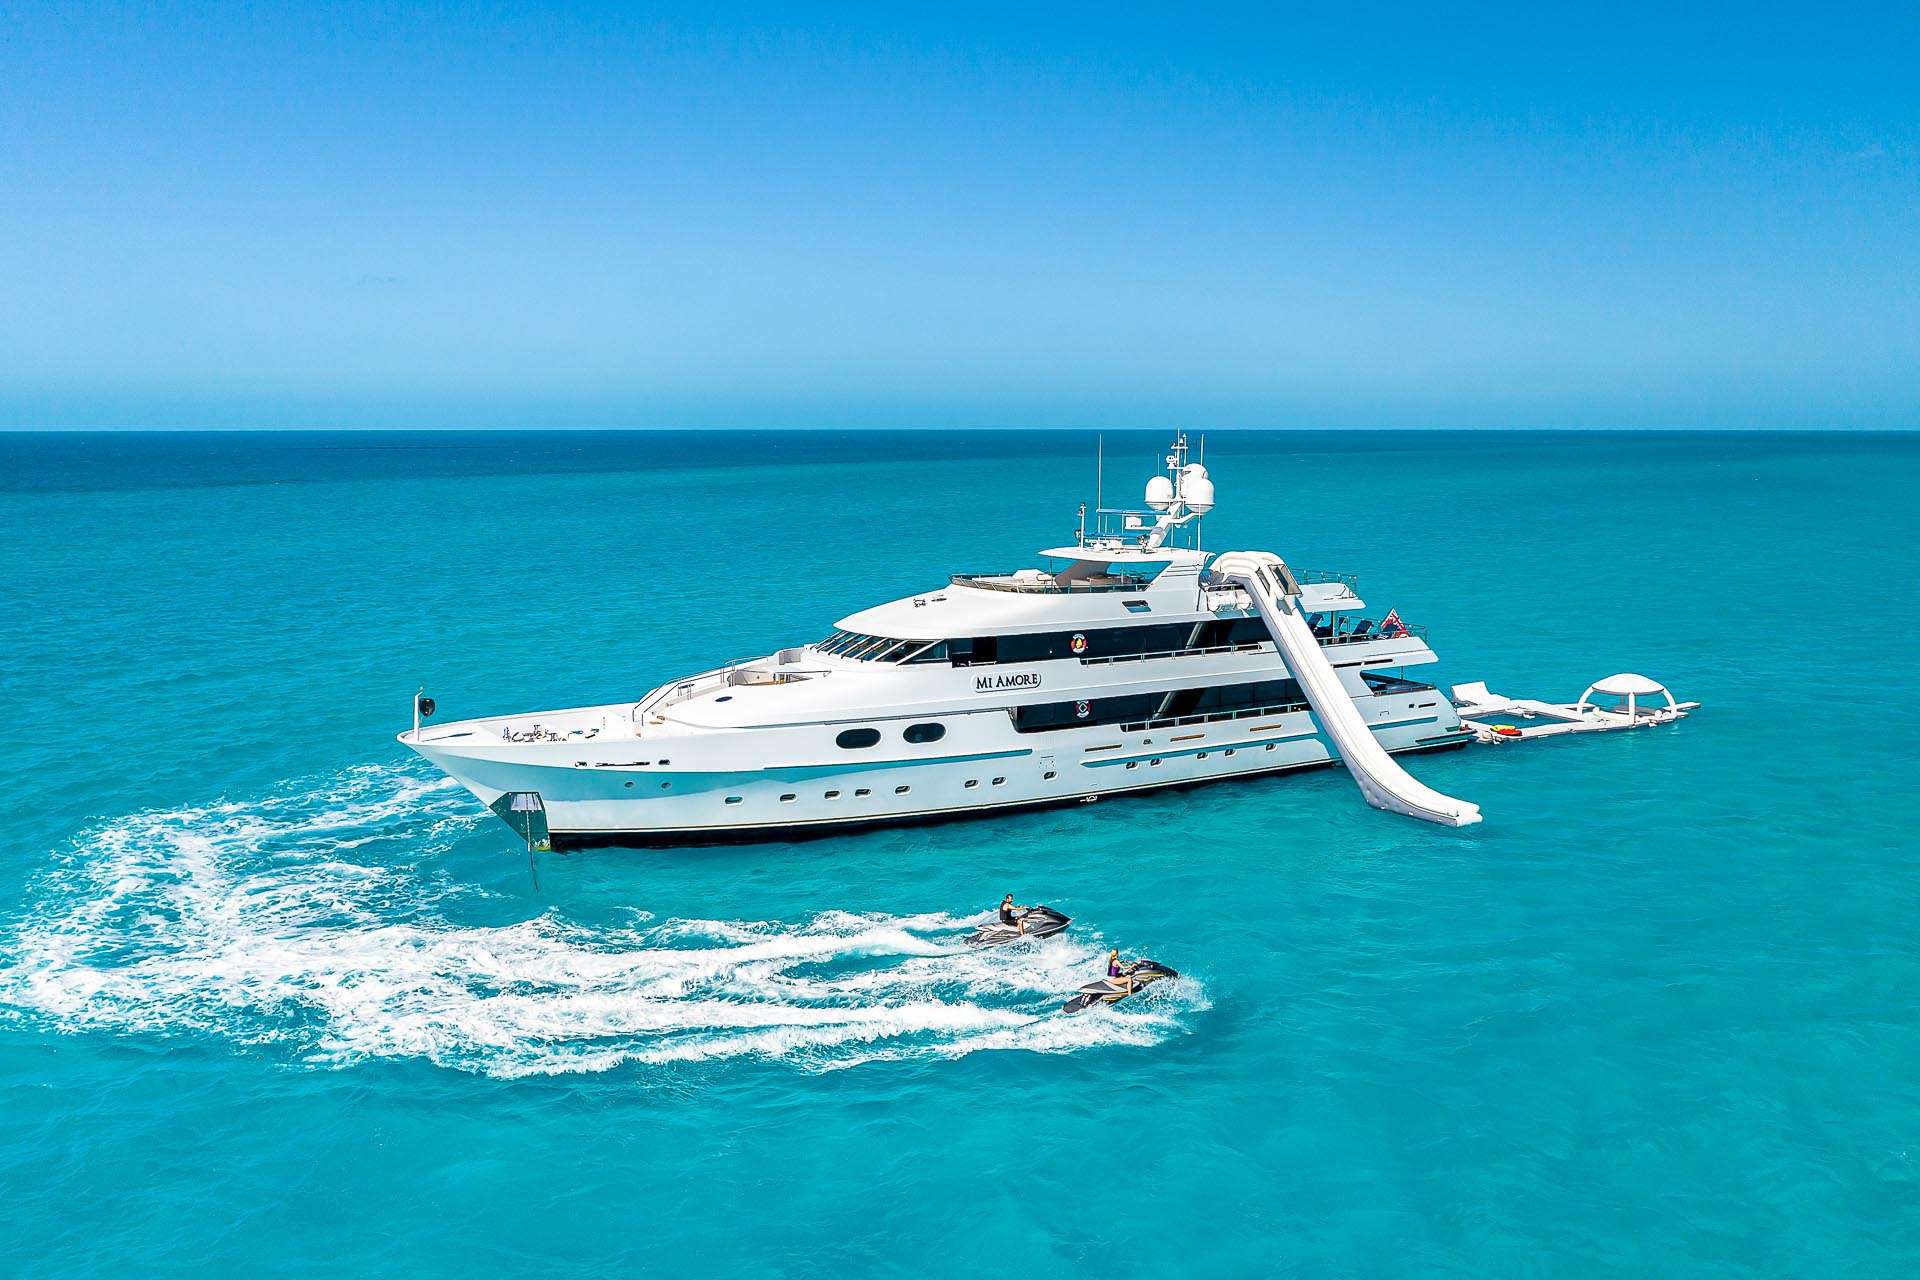 Caribbean Charter Professional Crewed Yacht Charters AllInclusive